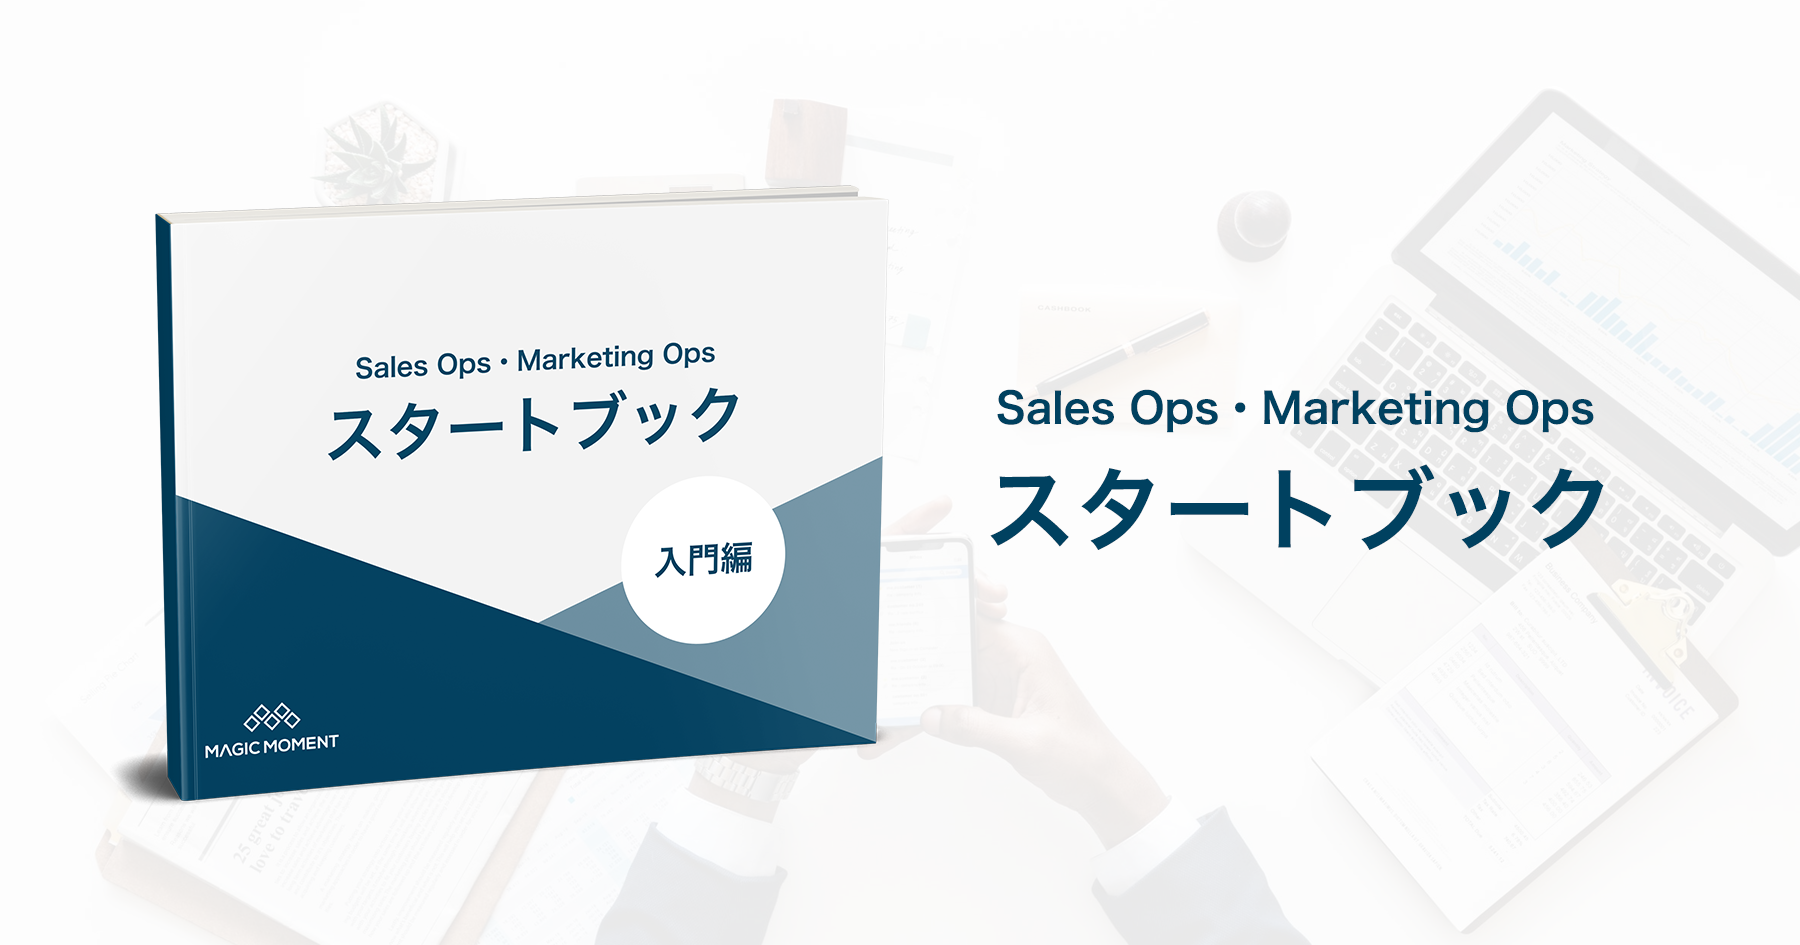 Sales Ops・Marketing Ops スタートブック